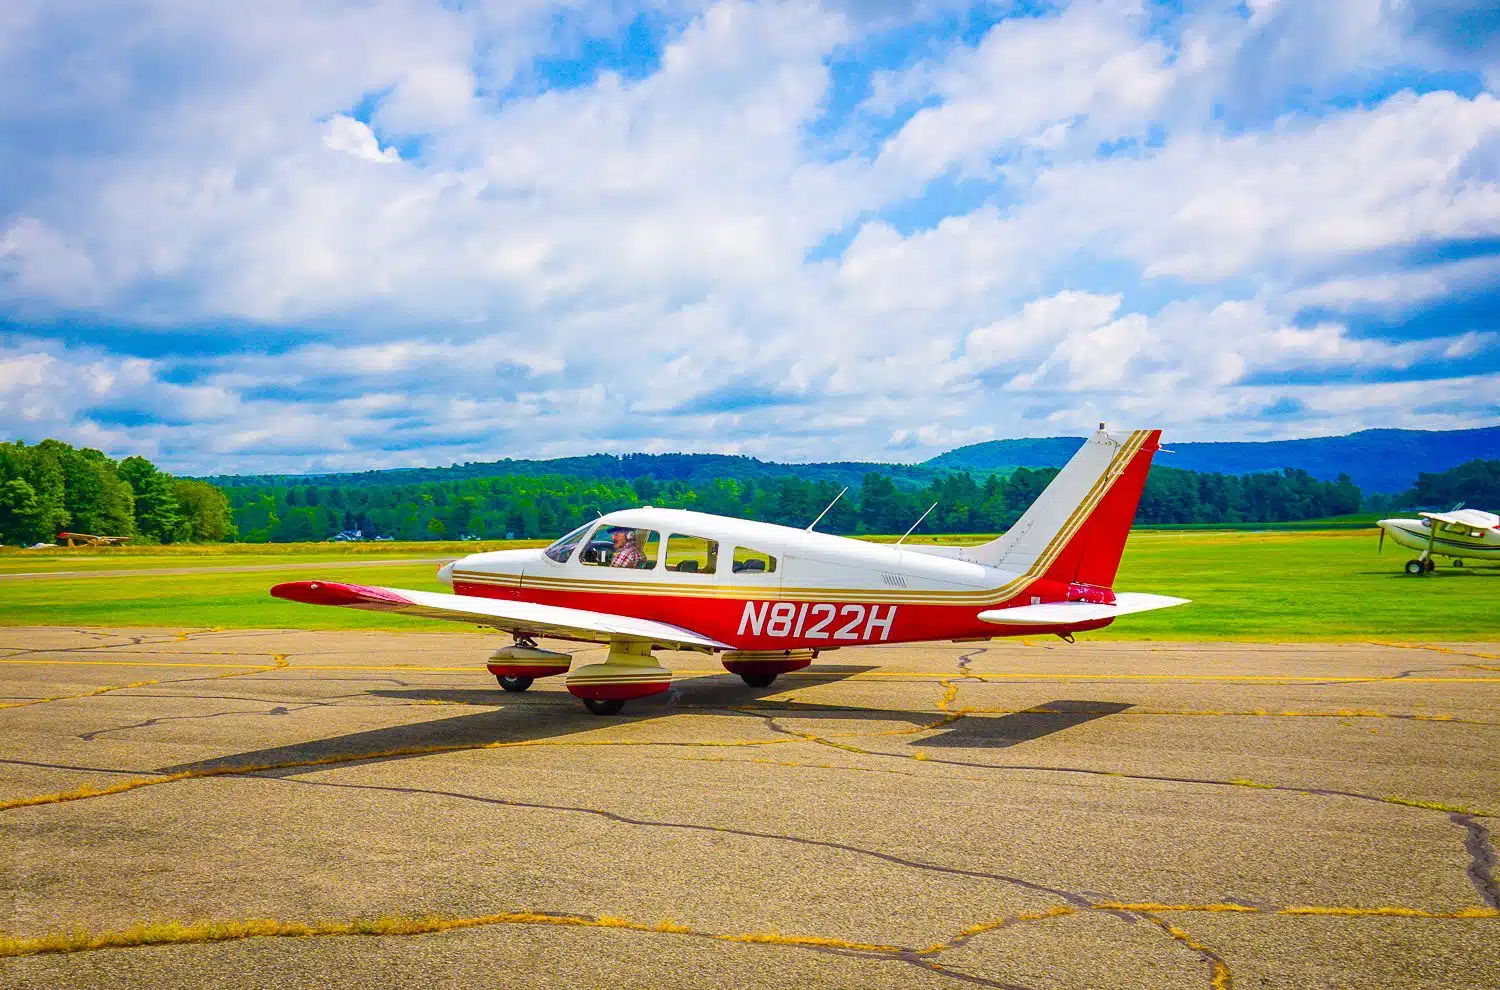 A tiny plane taking off in the Berkshires.